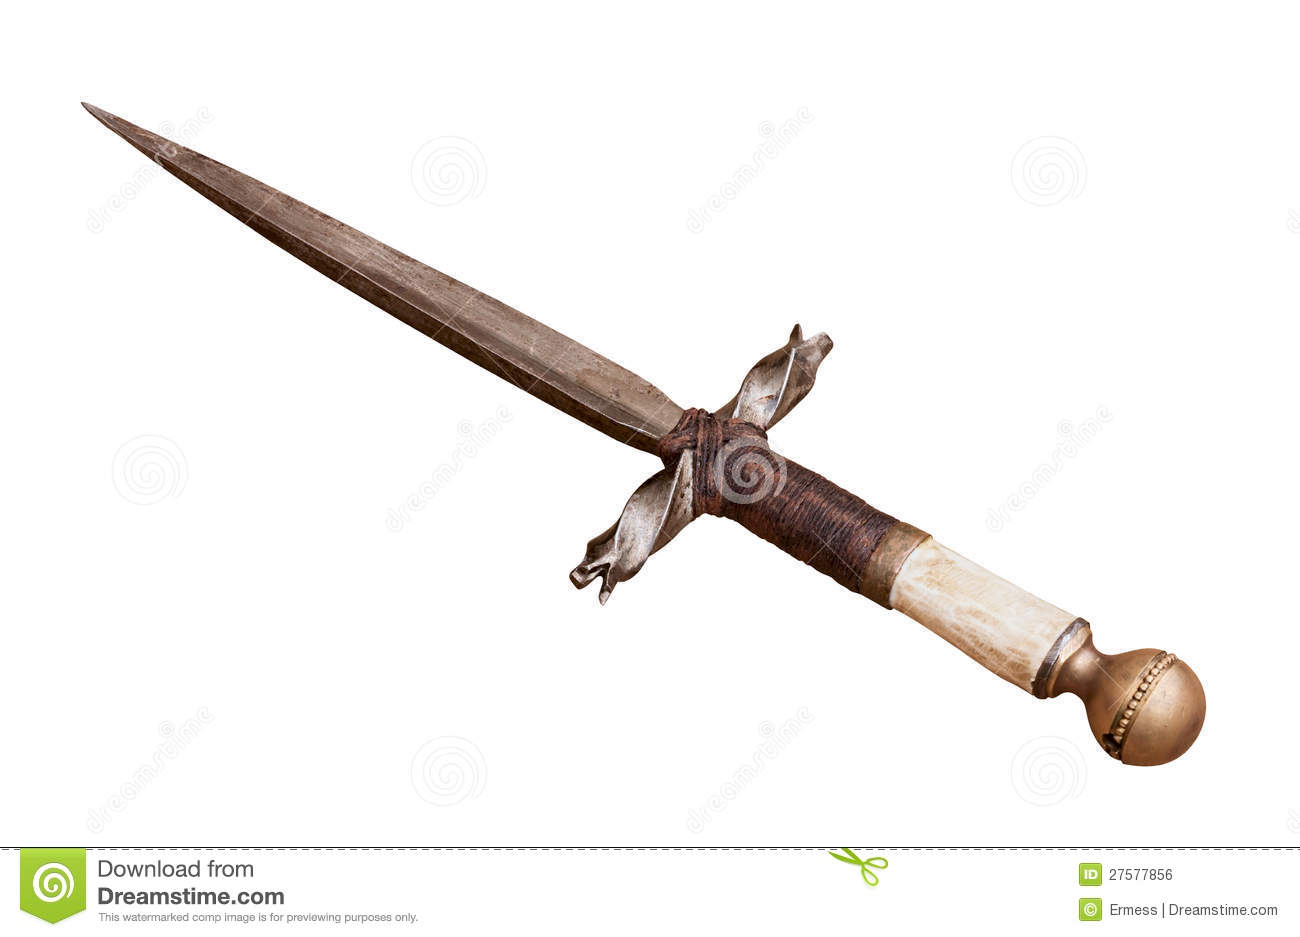 Medieval Dagger Royalty Free Stock Image   Image  27577856